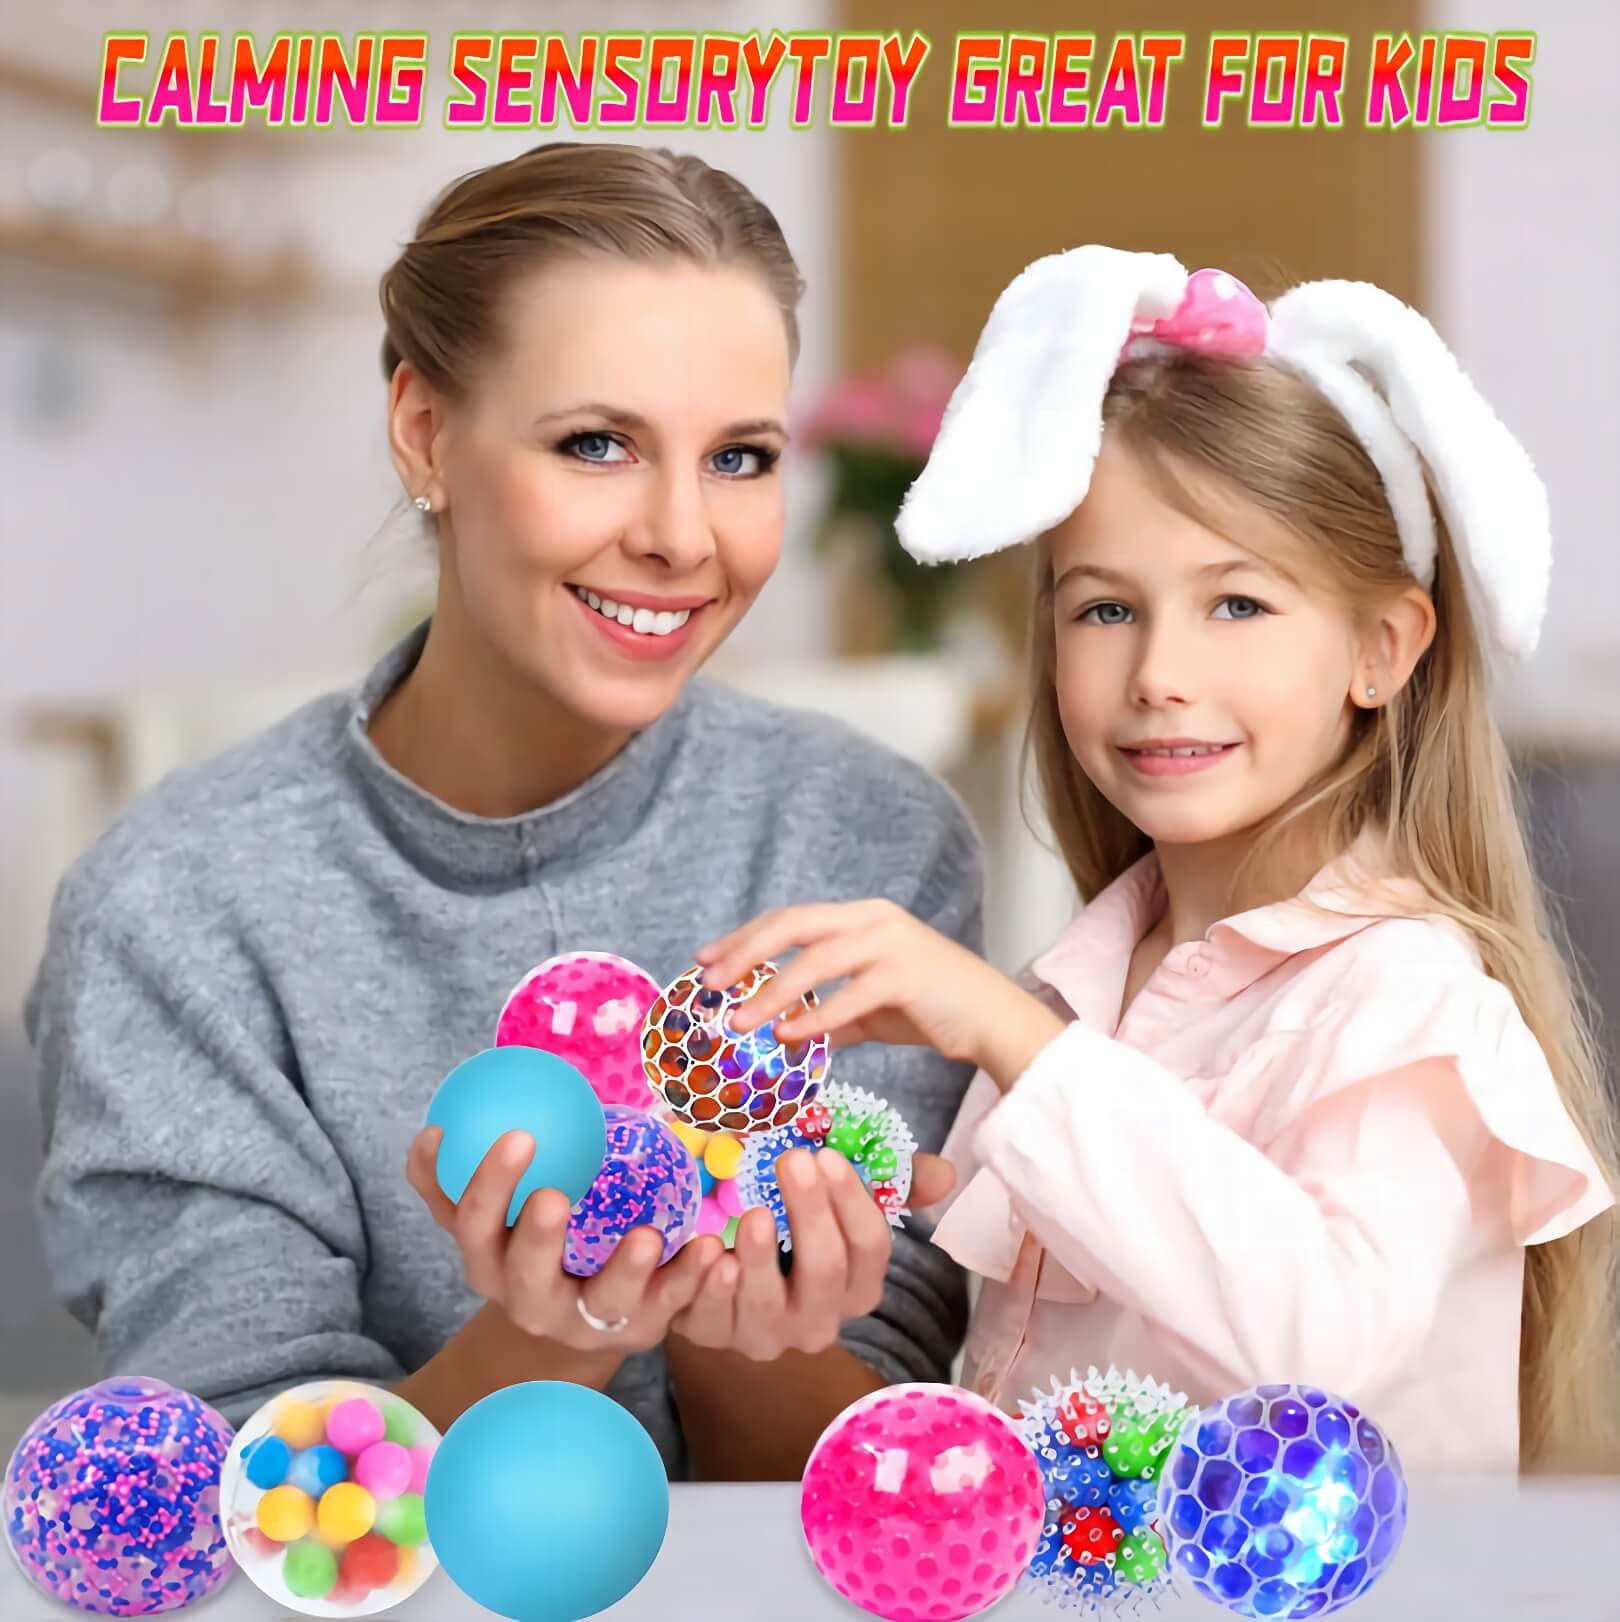 Squishy Stress Balls for Kids and Adults - 6 Balls Water Bead Stress Balls Balls Sensory Ball Squeeze Ball Fidget Toys Set for Anxiety Autism ADHD and More